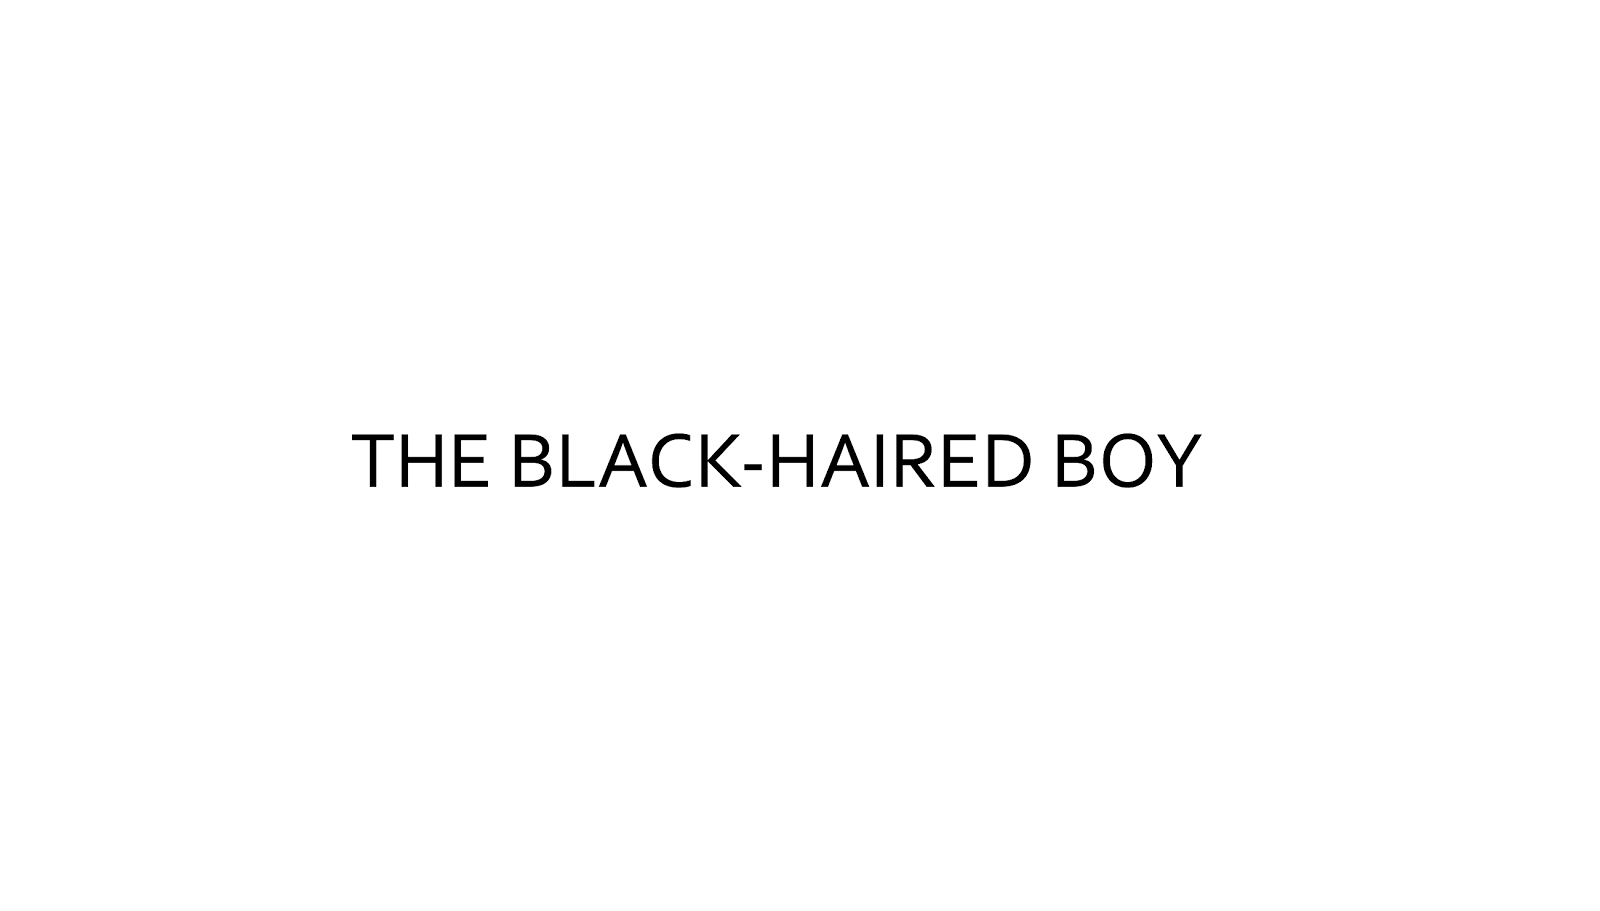 The Black-Haired Boy